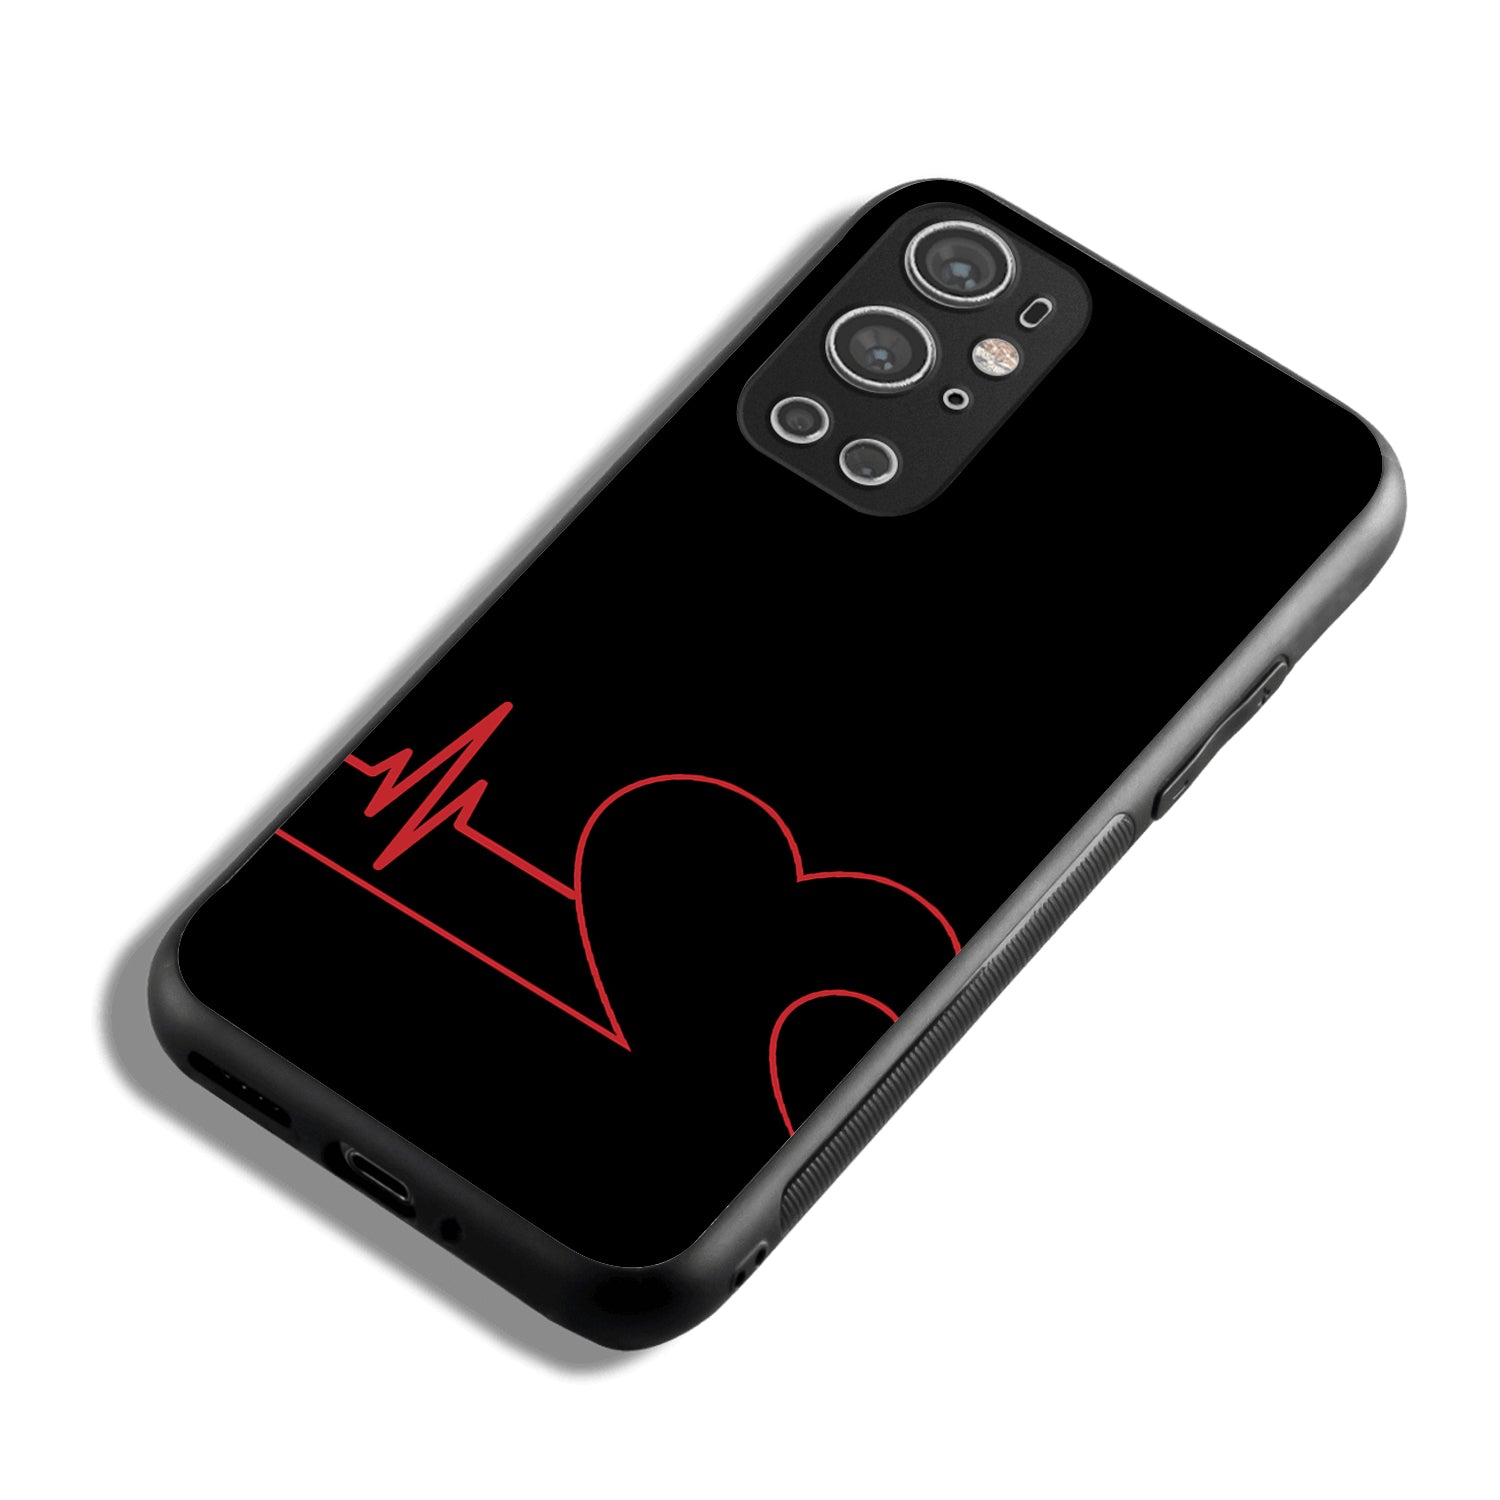 Two Heart Beat Couple Oneplus 9 Pro Back Case